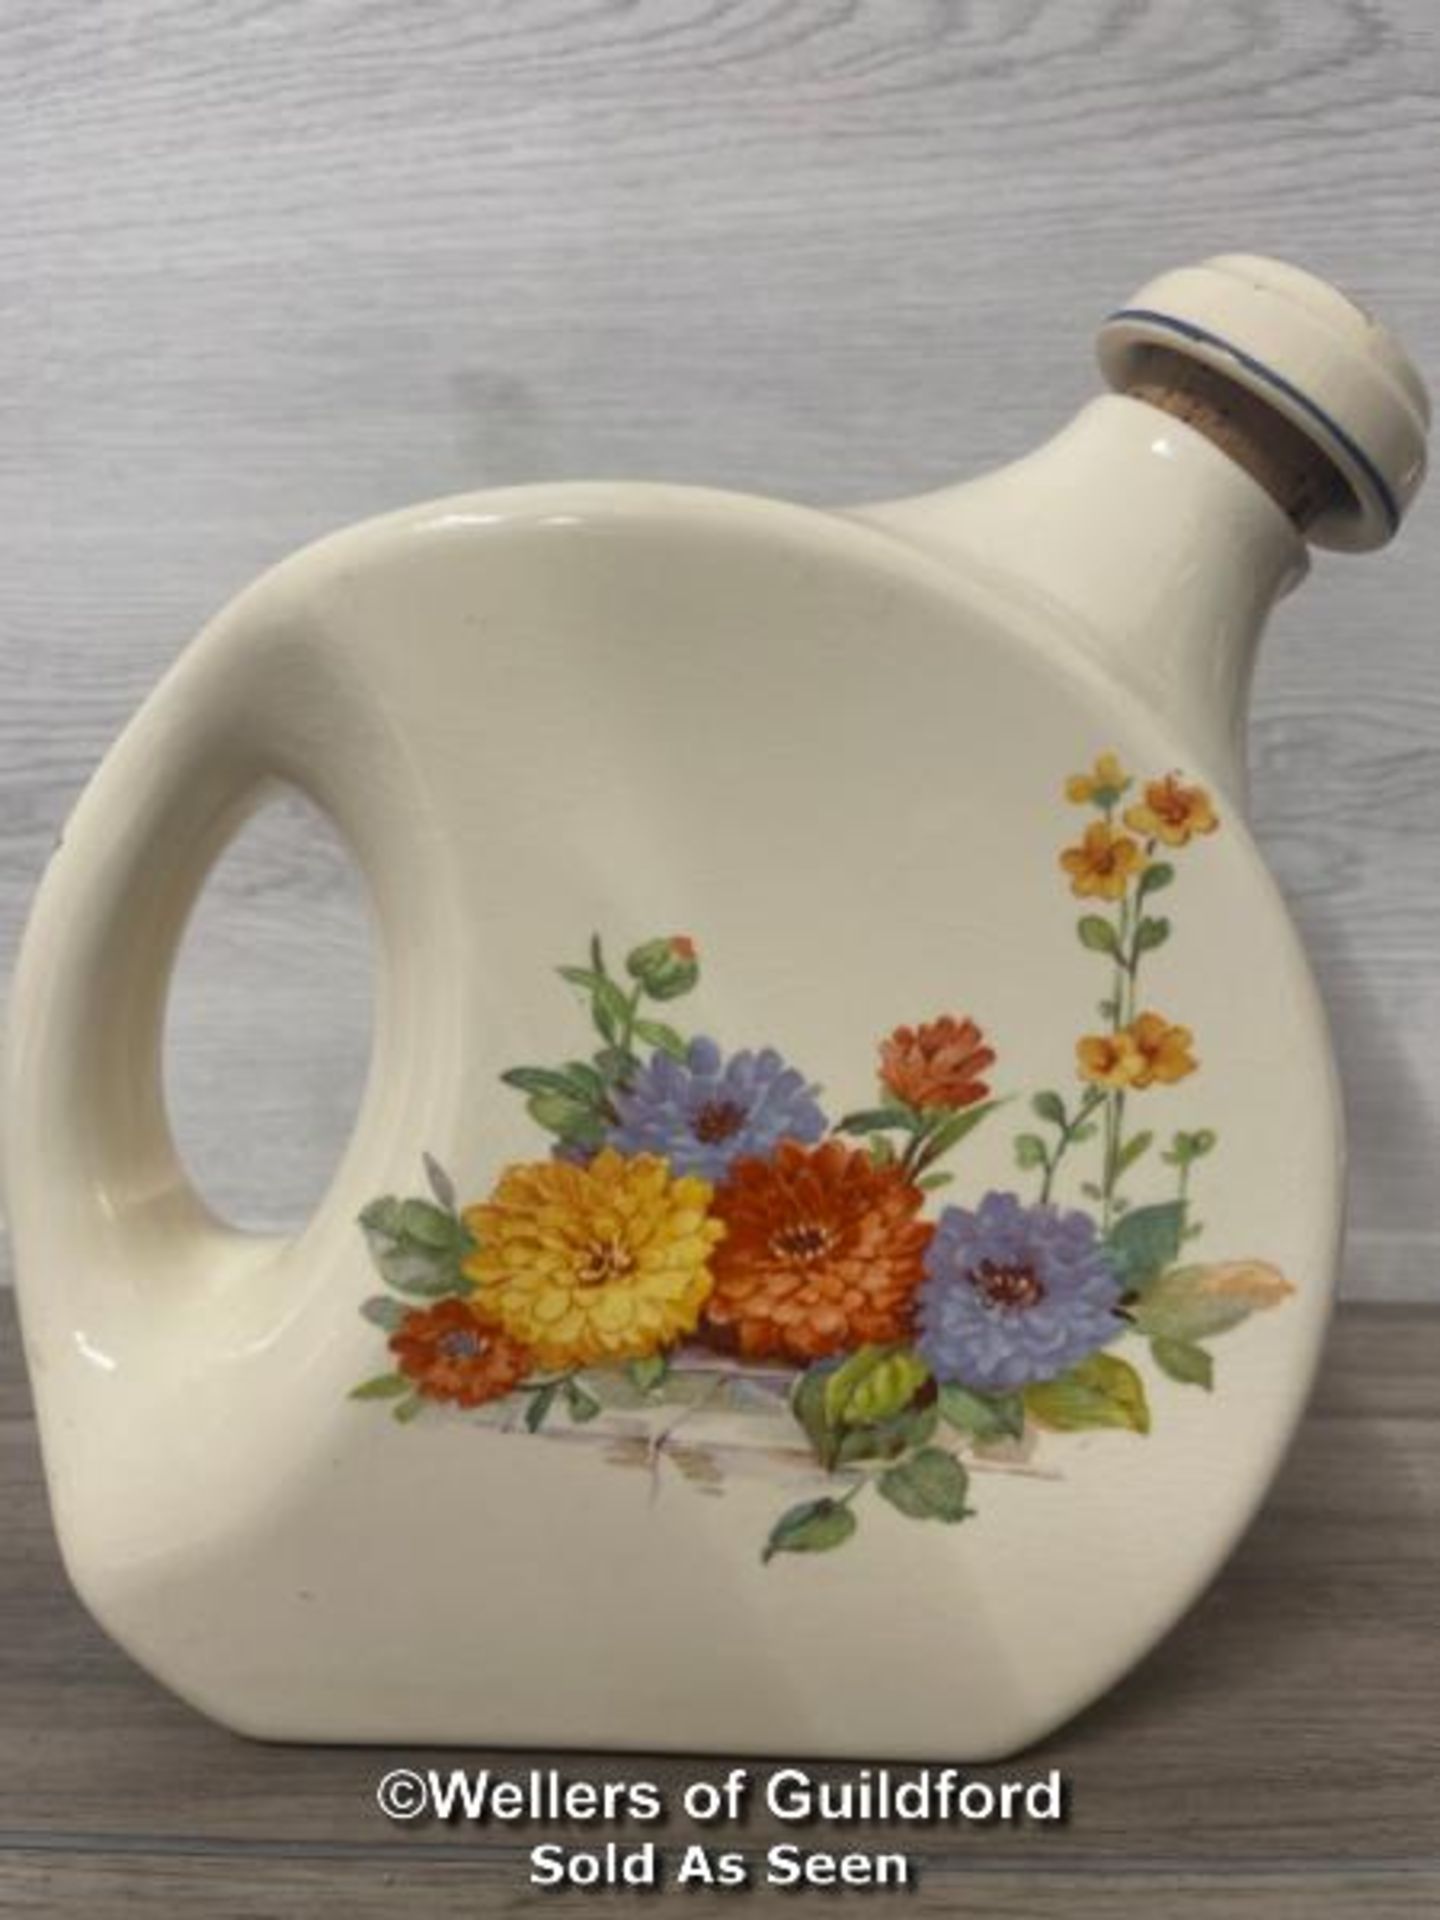 FRIDGE COLD CERAMIC WATER BOTTLE MADE IN THE U.S.A., ZINNIA PATTERN - Image 2 of 3